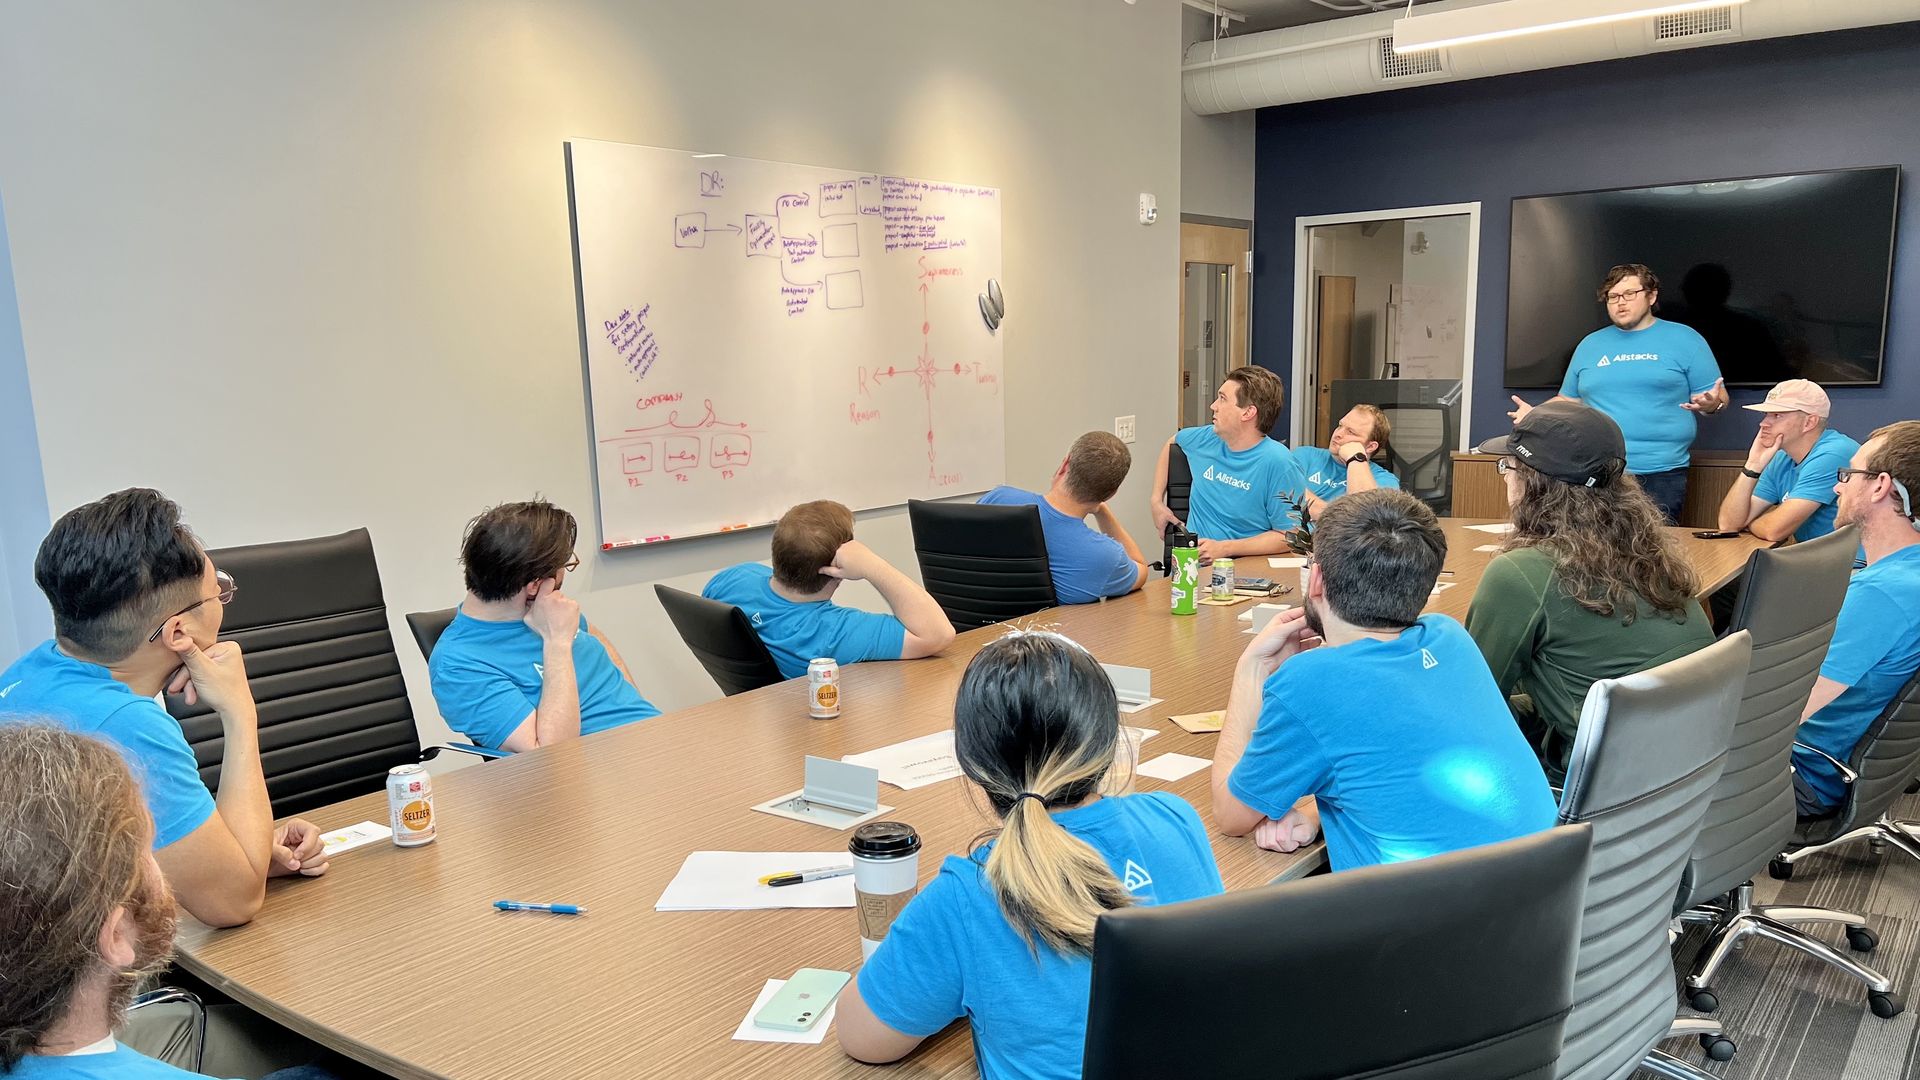 A group of software workers in matching blue shirts stare at a whiteboard. 